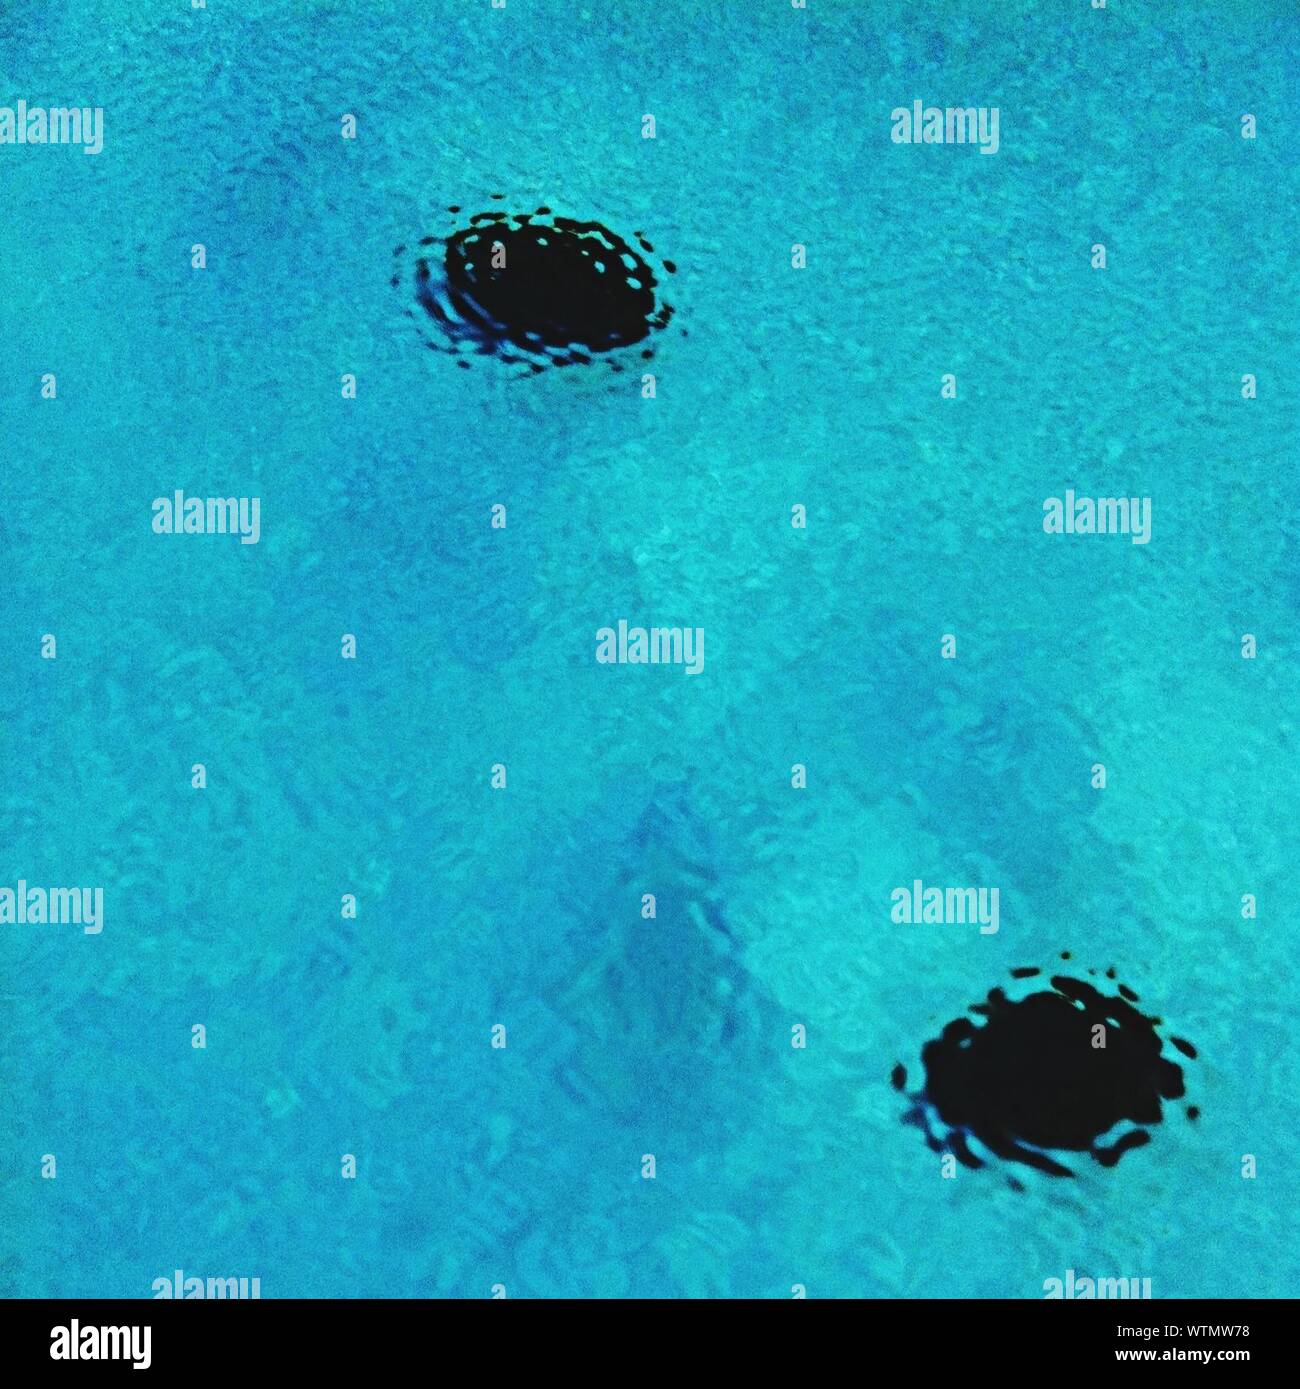 Black Dots Under Blue Water Stock Photo